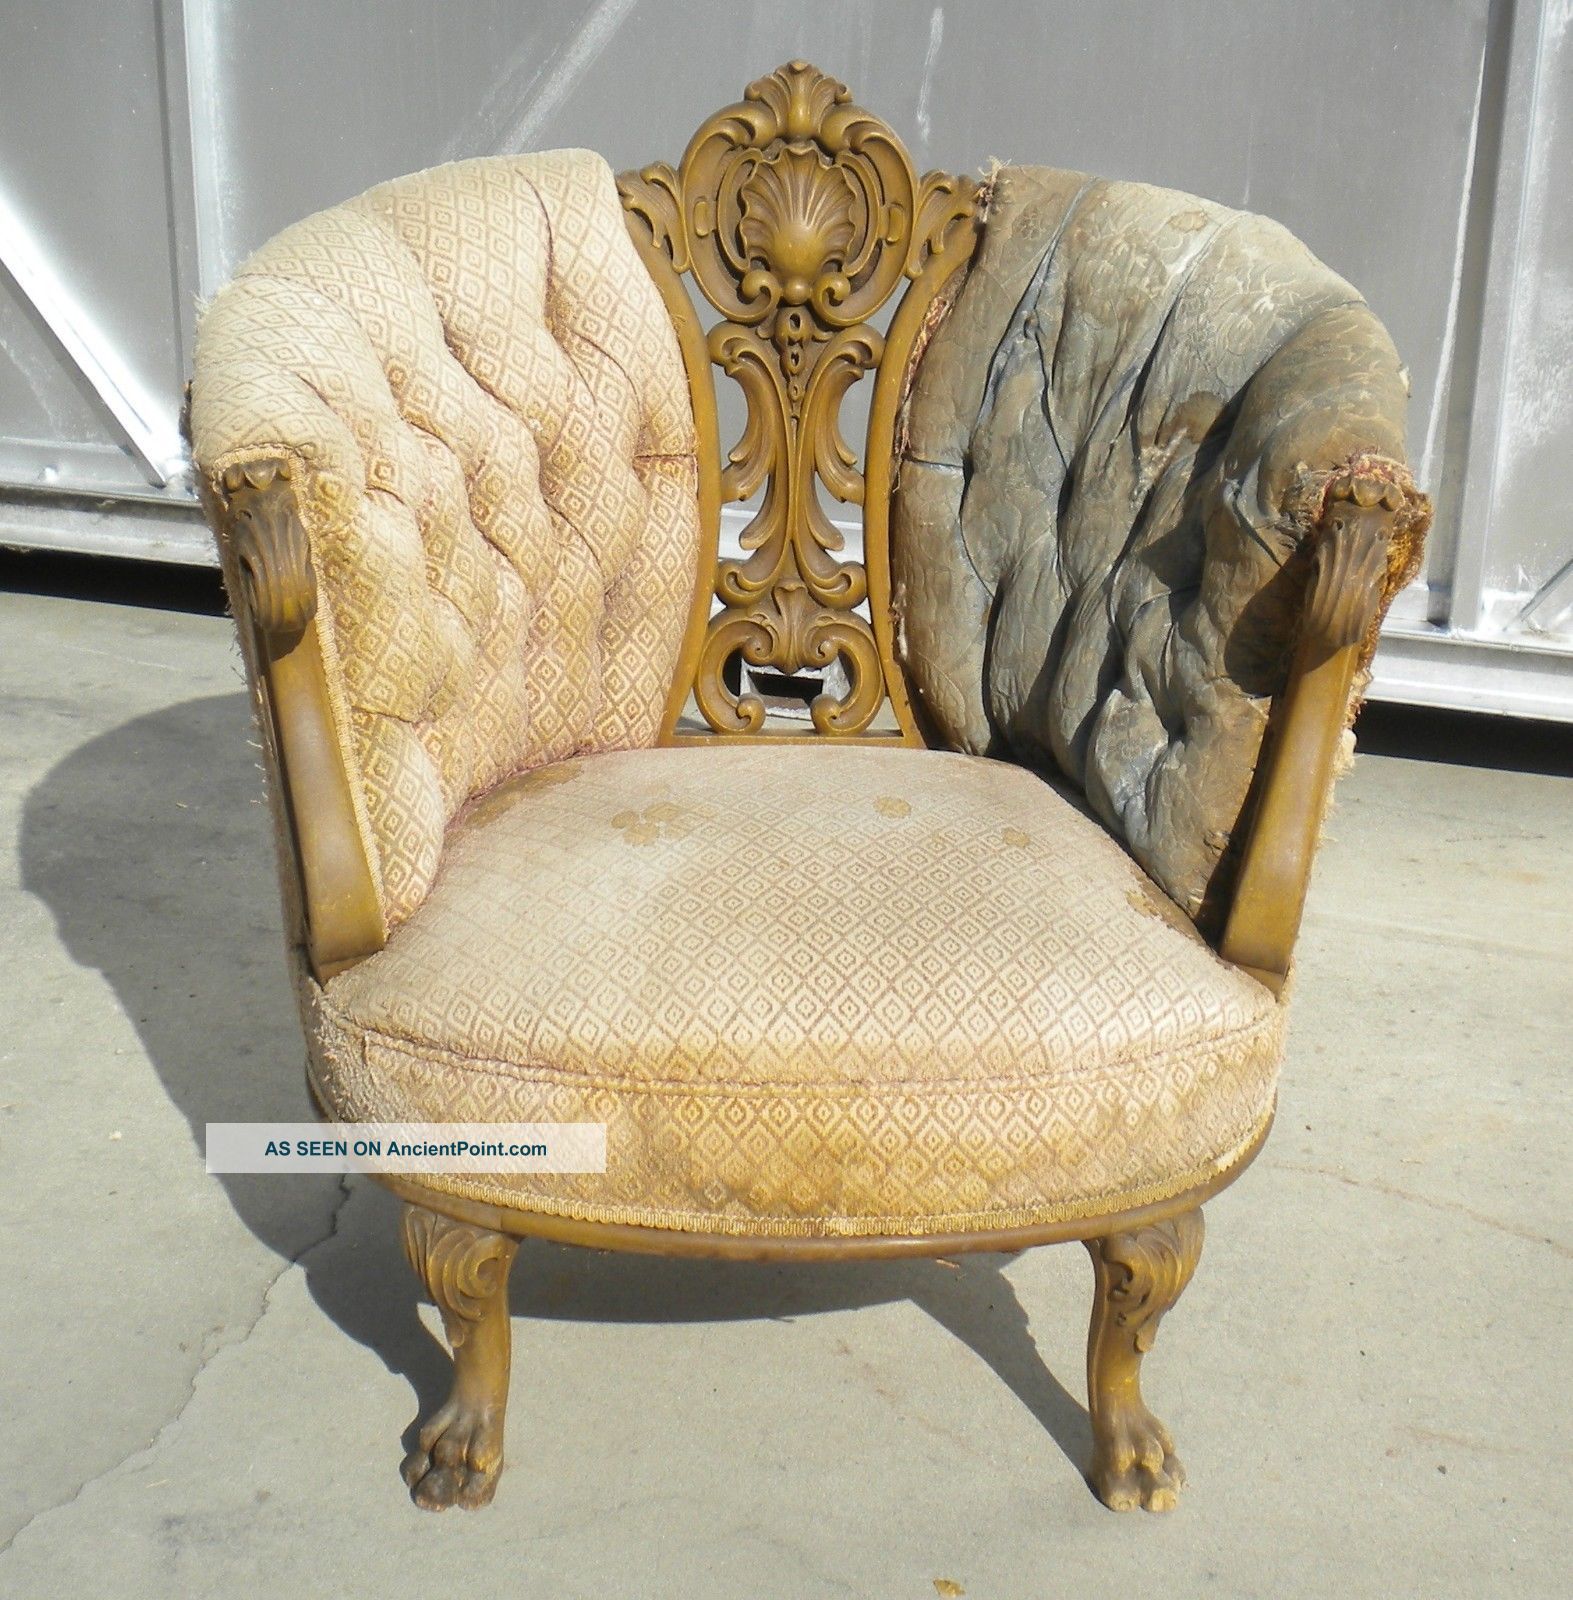 Antique Victorian Parlor Chair Carved Wood & Upholstery In Need Of Tlc 1800-1899 photo